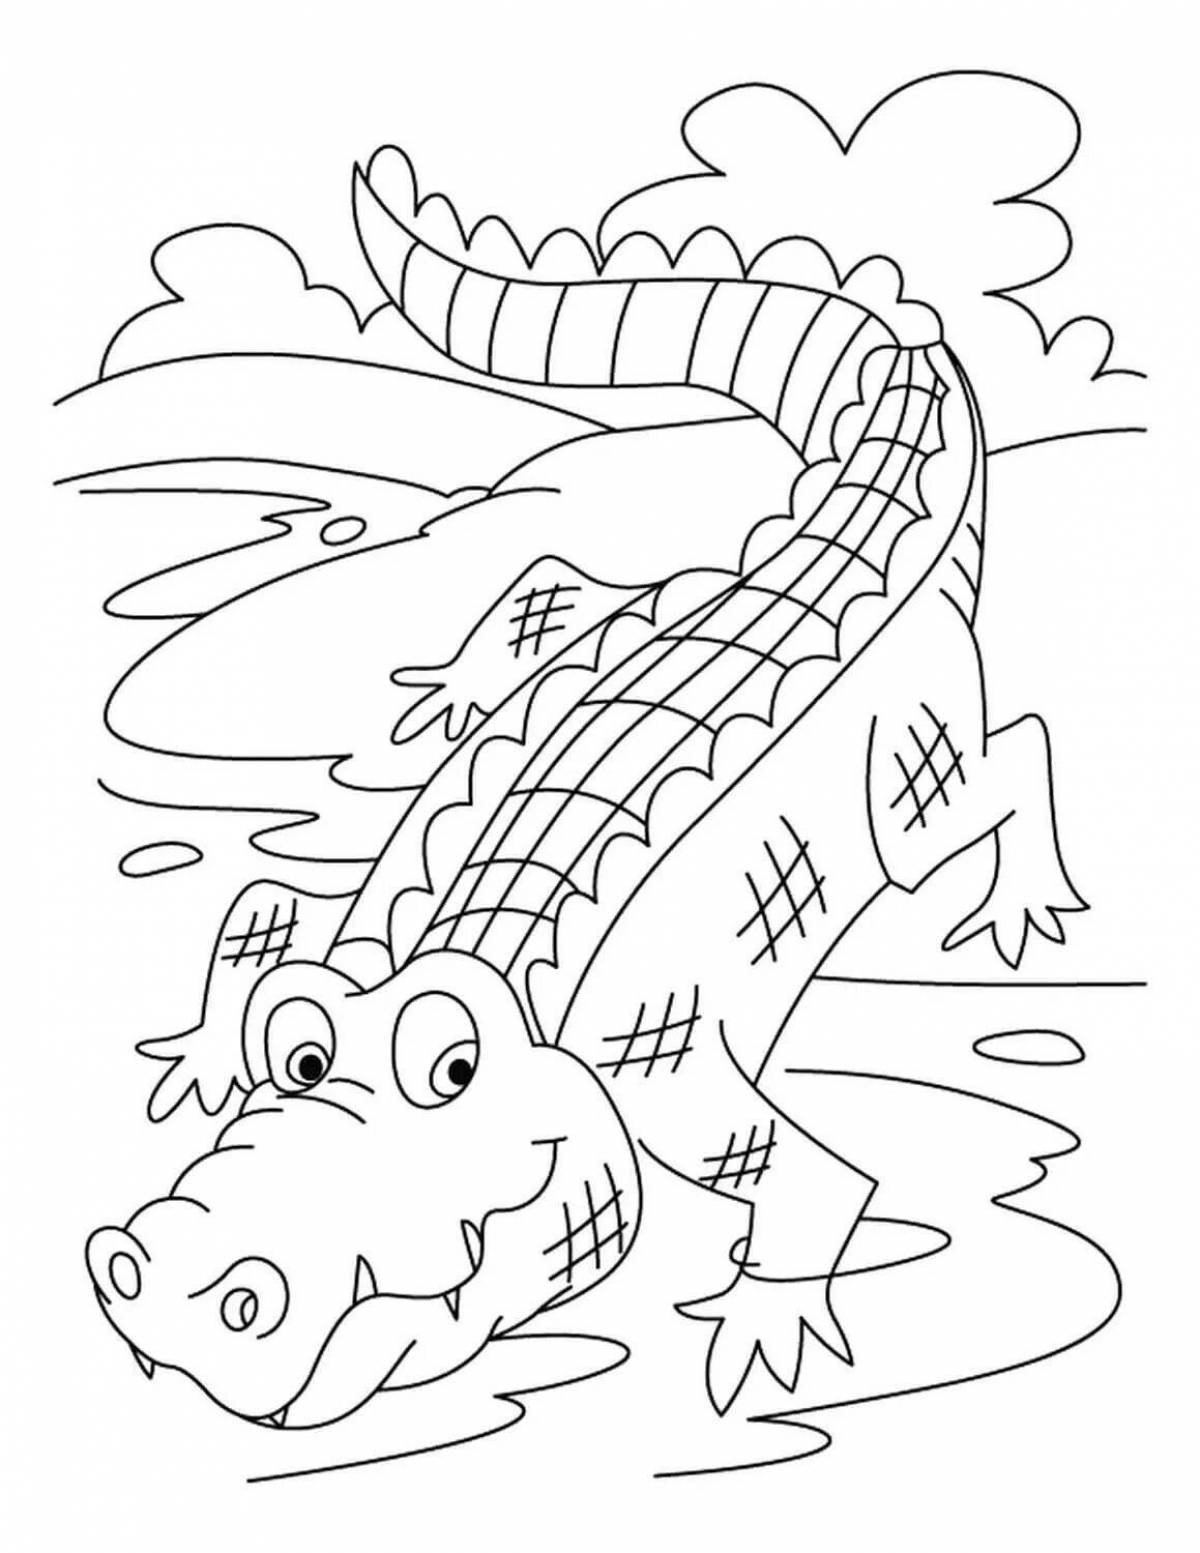 Magic crocodile coloring book for 3-4 year olds